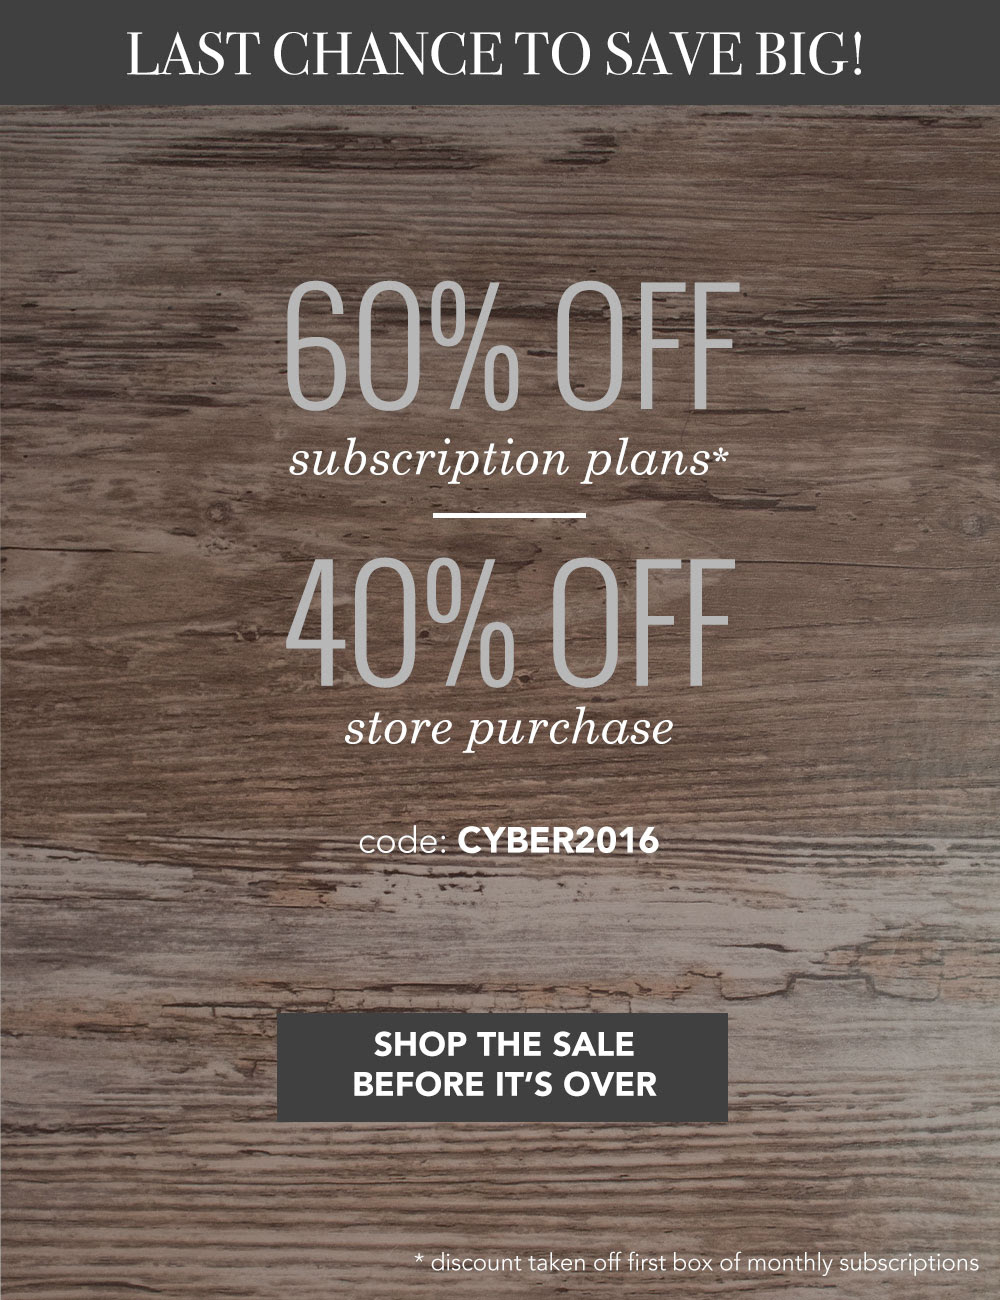 Extended! SprezzaBox Cyber Monday Sale – 60% Off Subscriptions + 40% Off Store!